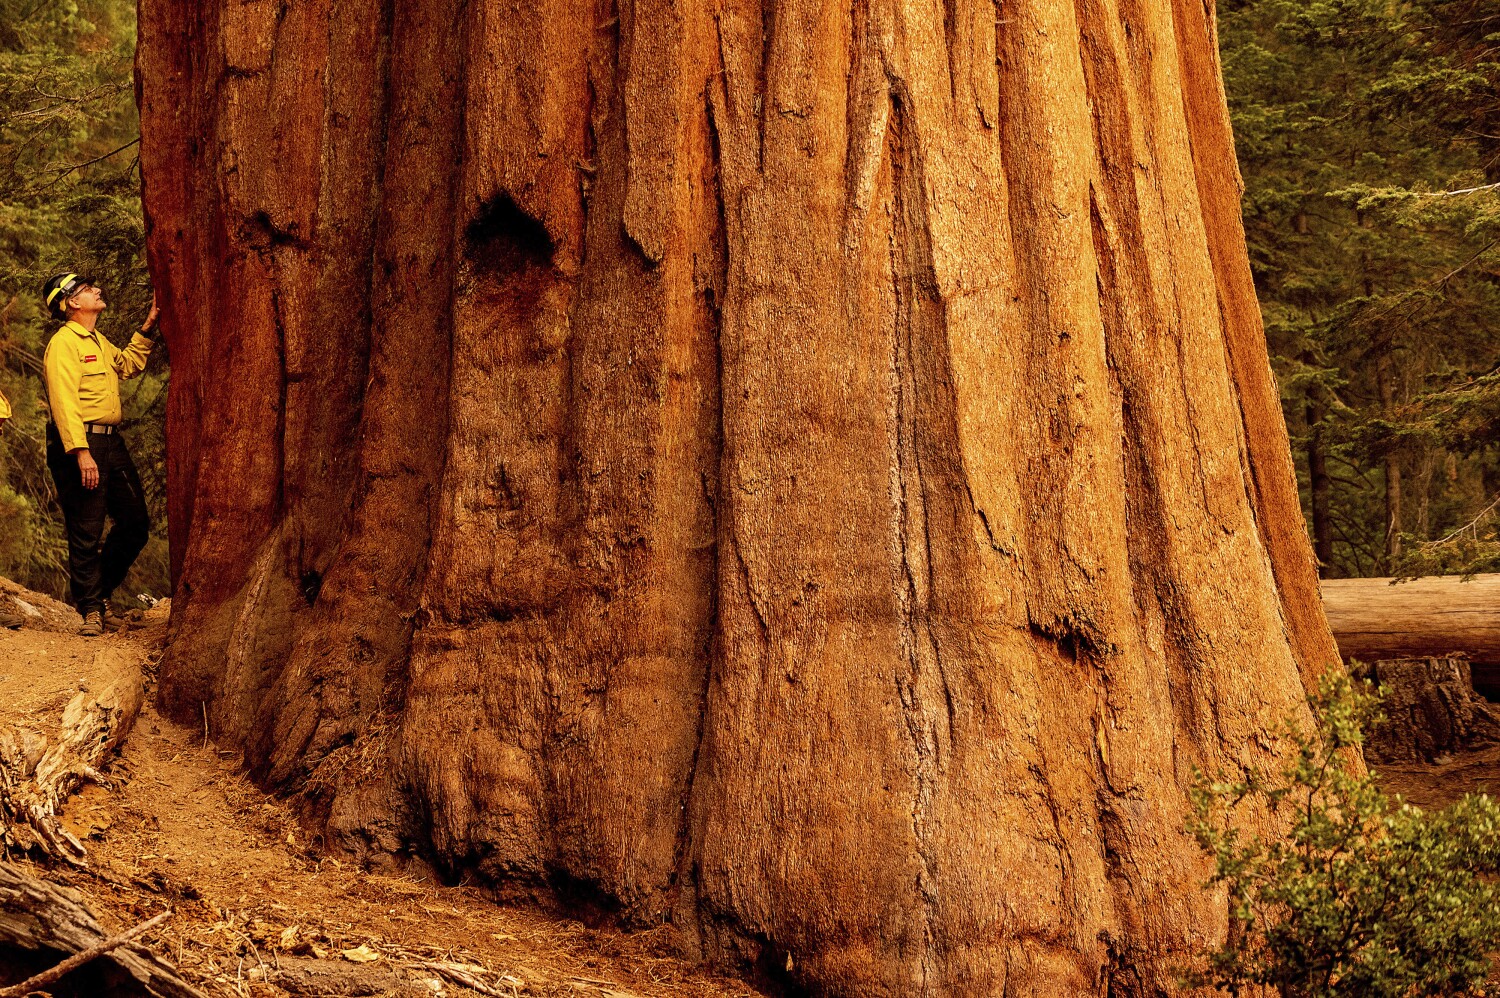 The firefighting strategies that saved some of the world's largest sequoias 